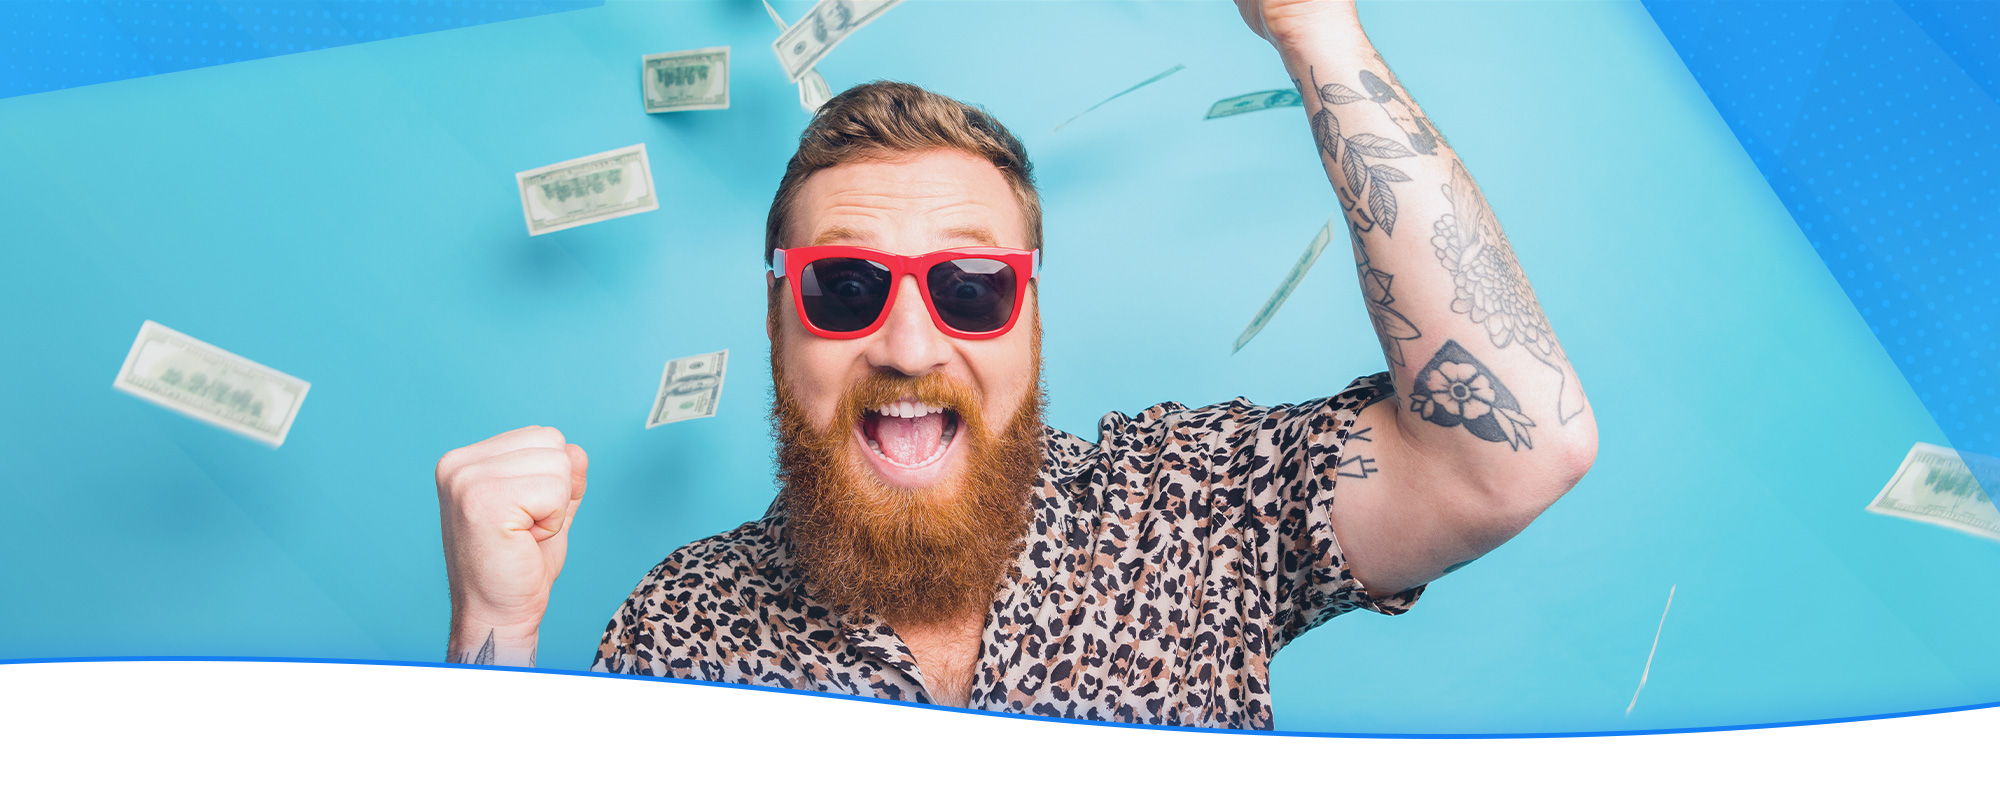 A man with a red beard and red glasses raising his hands up as a sign of satisfaction. Dollars fly around him.